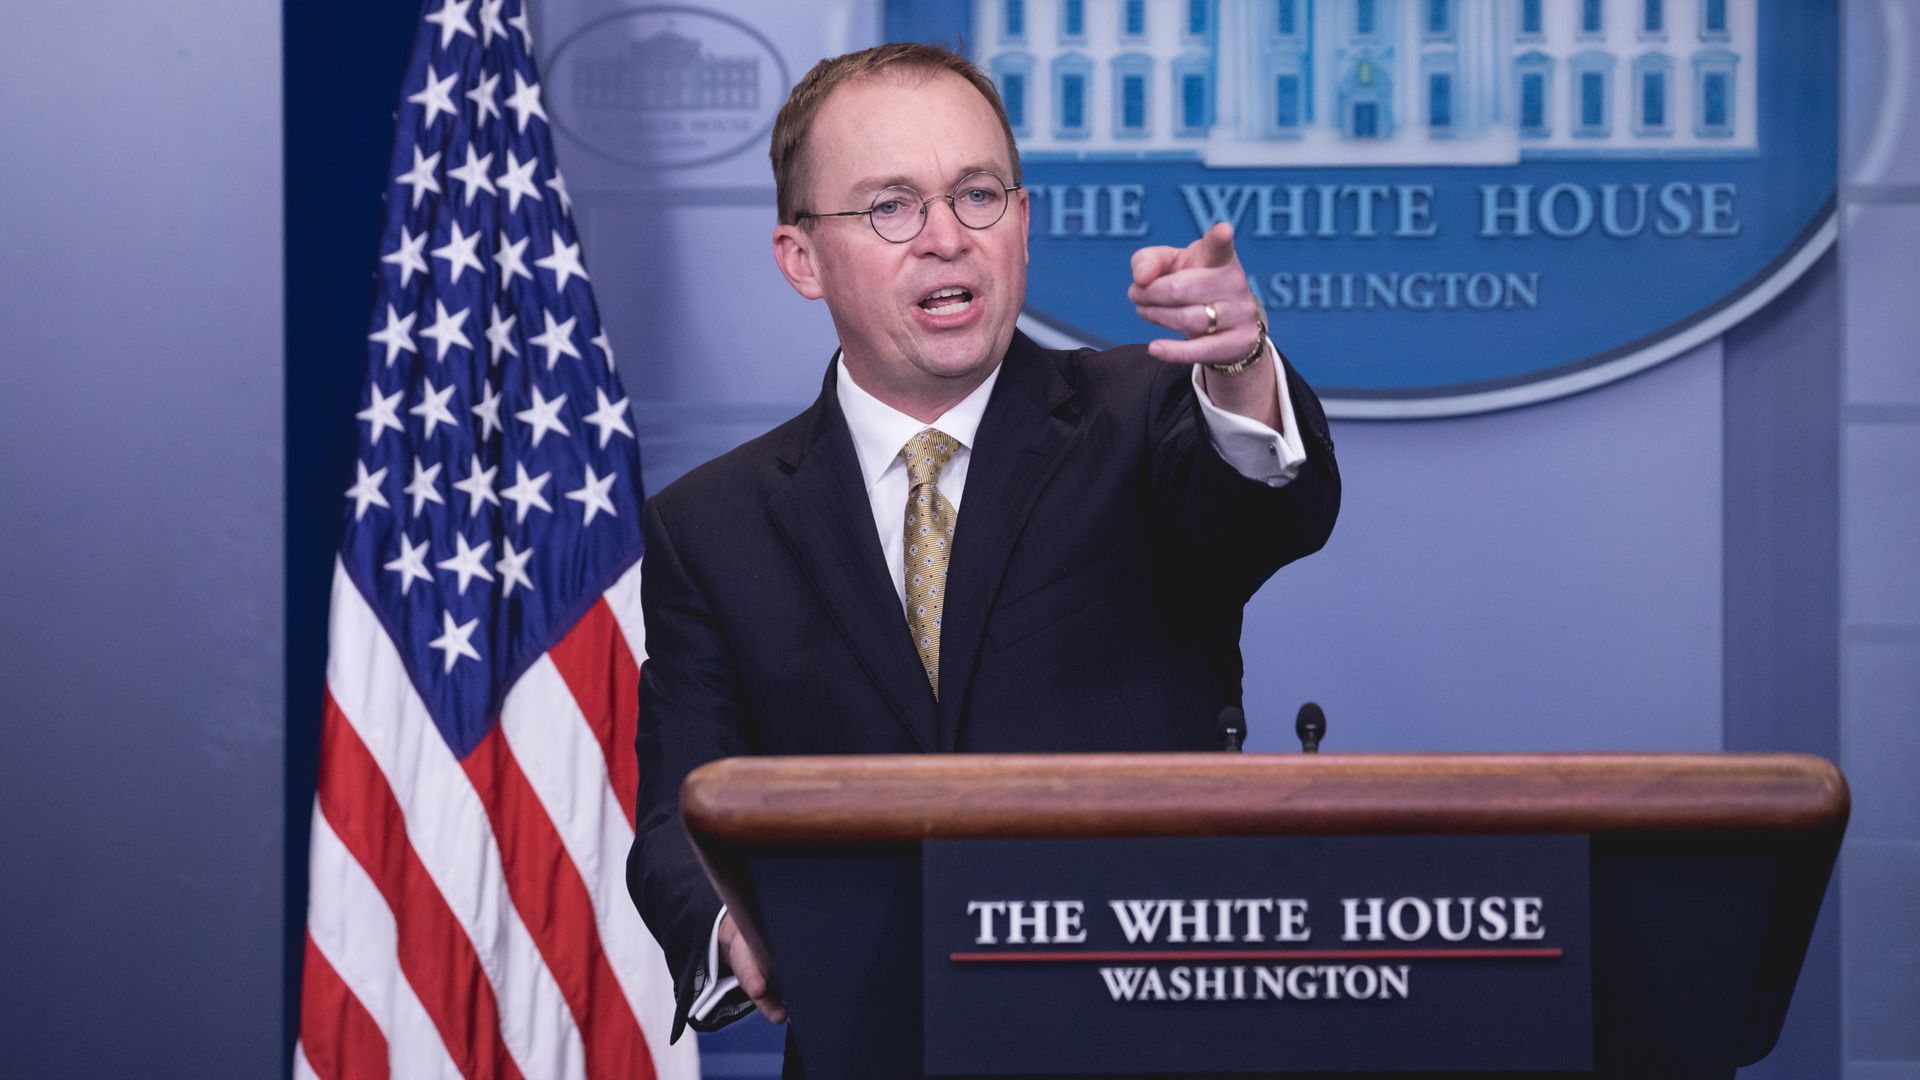 White House acting chief of staff John Mulvaney instructed a former White House official Carl Kline not to testify before the committee on security clearance practices.